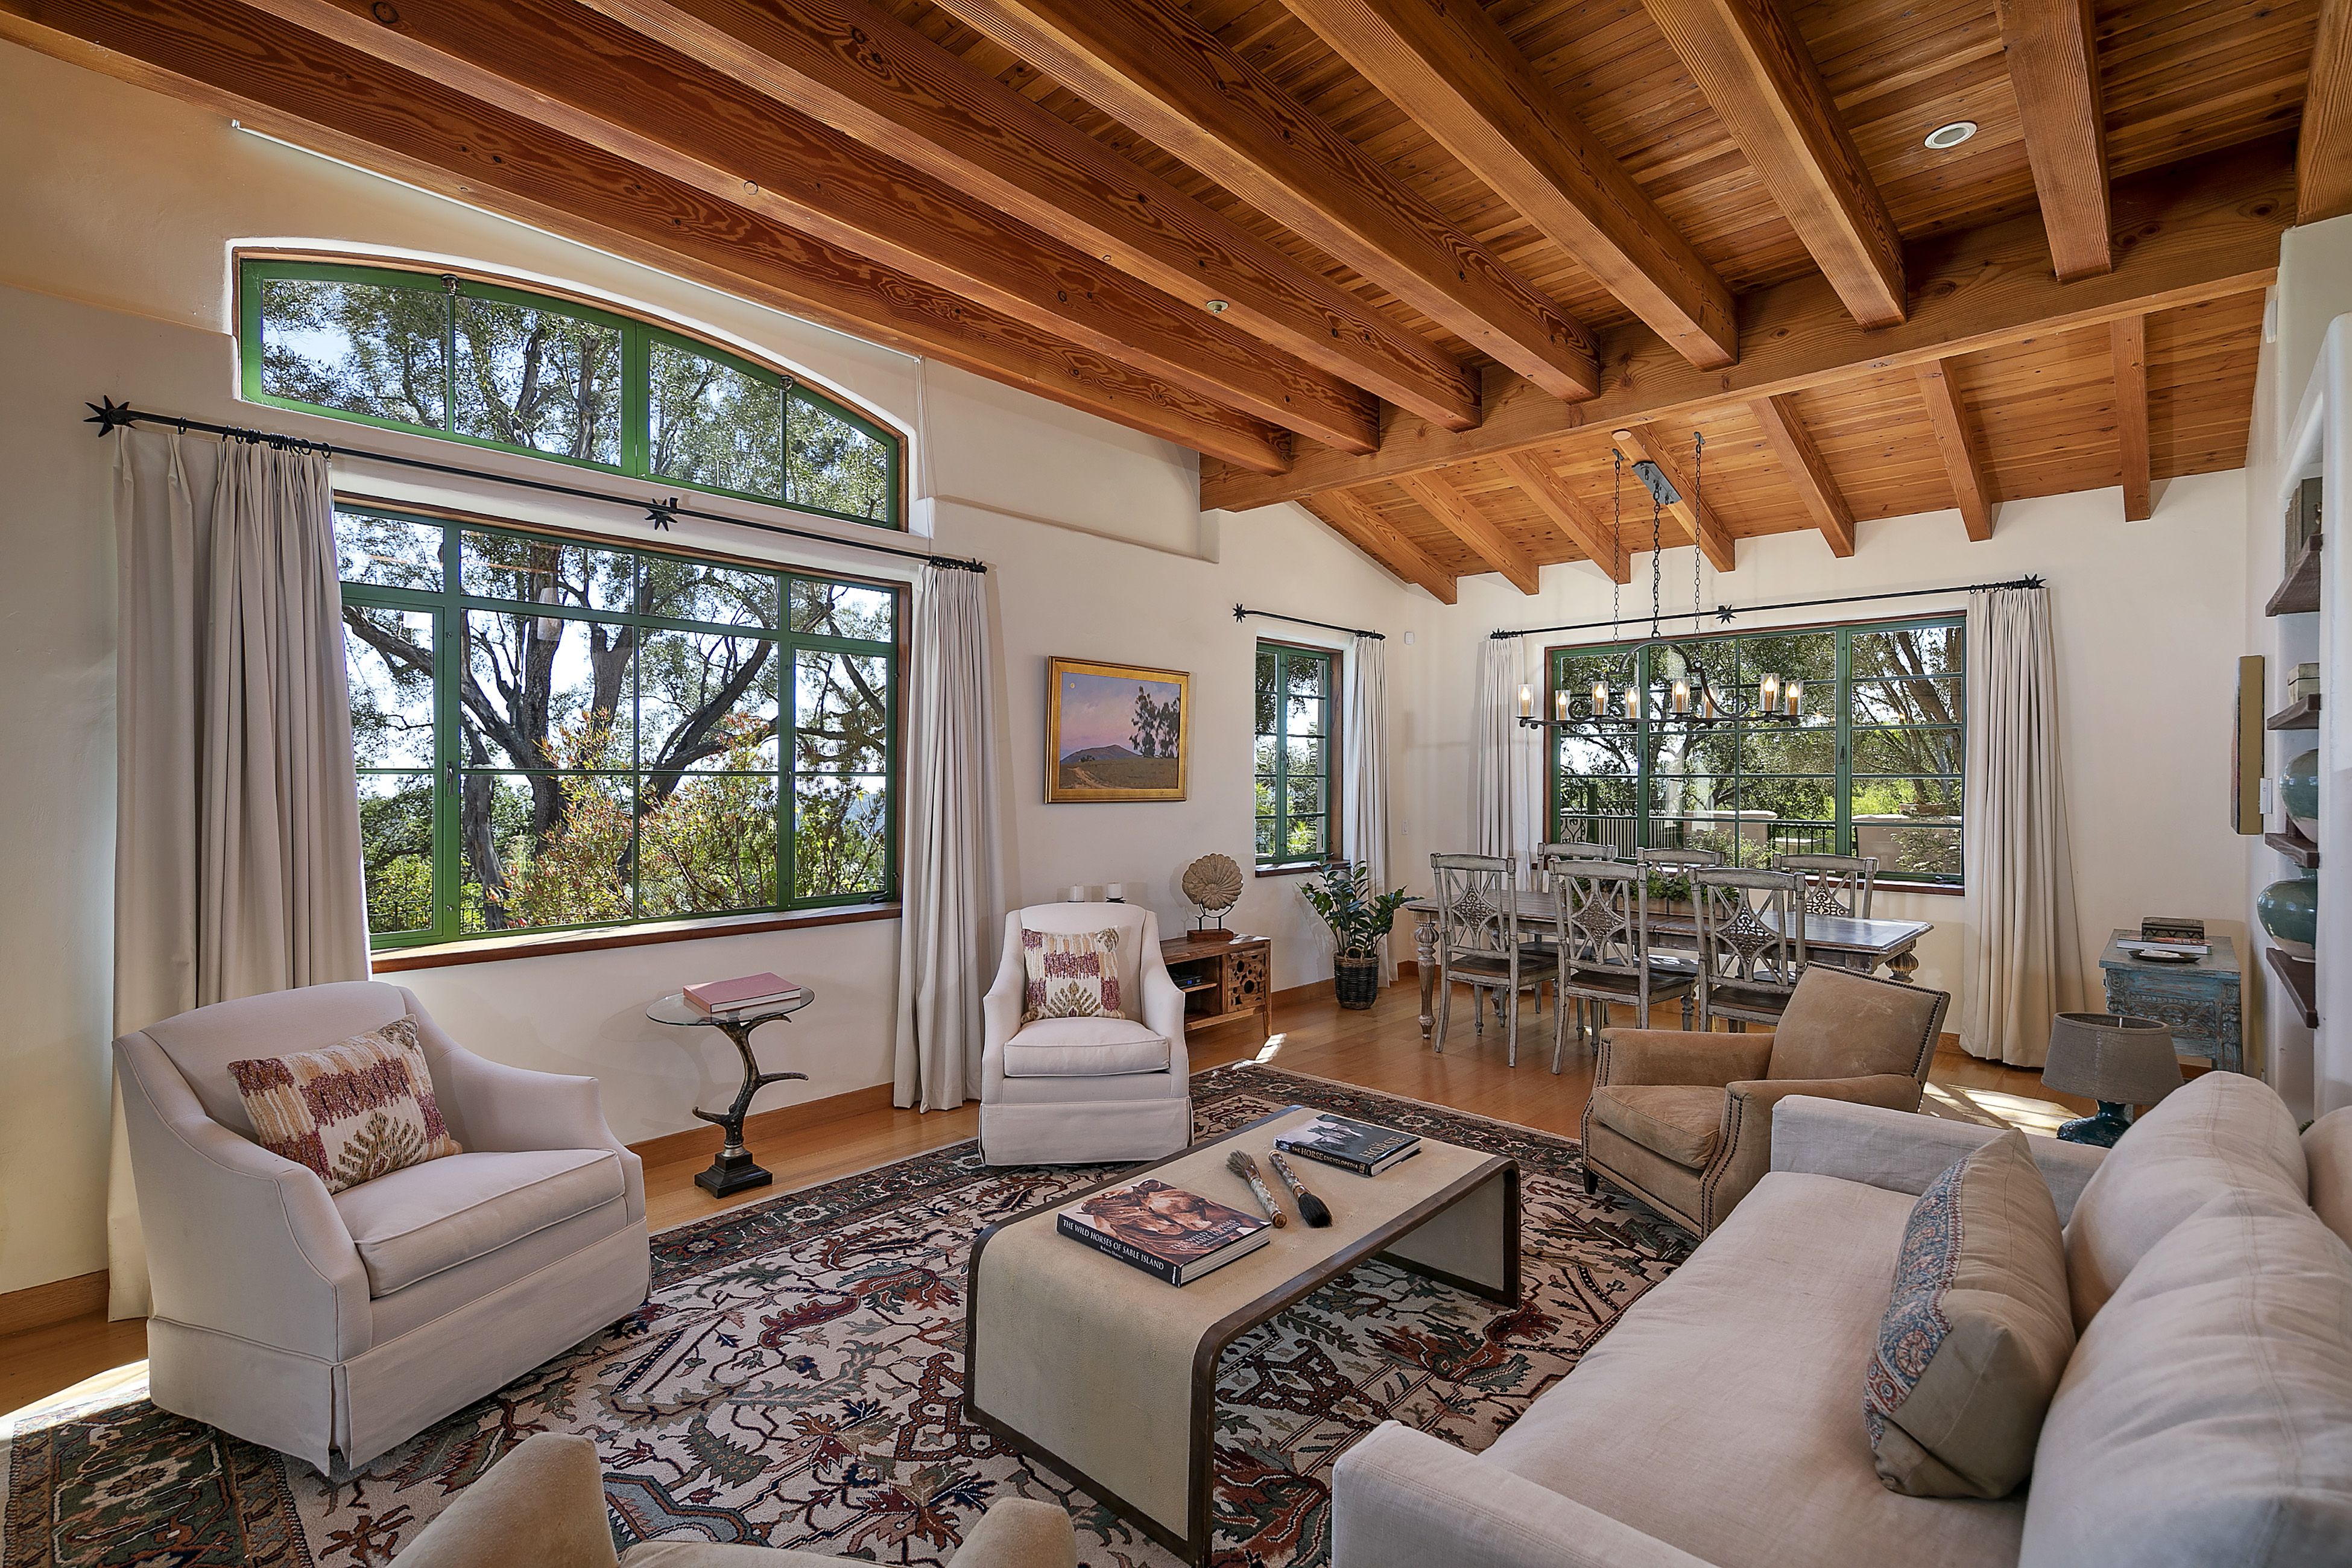 Beautifully furnished living room of a home for sale in Santa Barbara, with an open-beam ceiling and large multi-pane picture windows